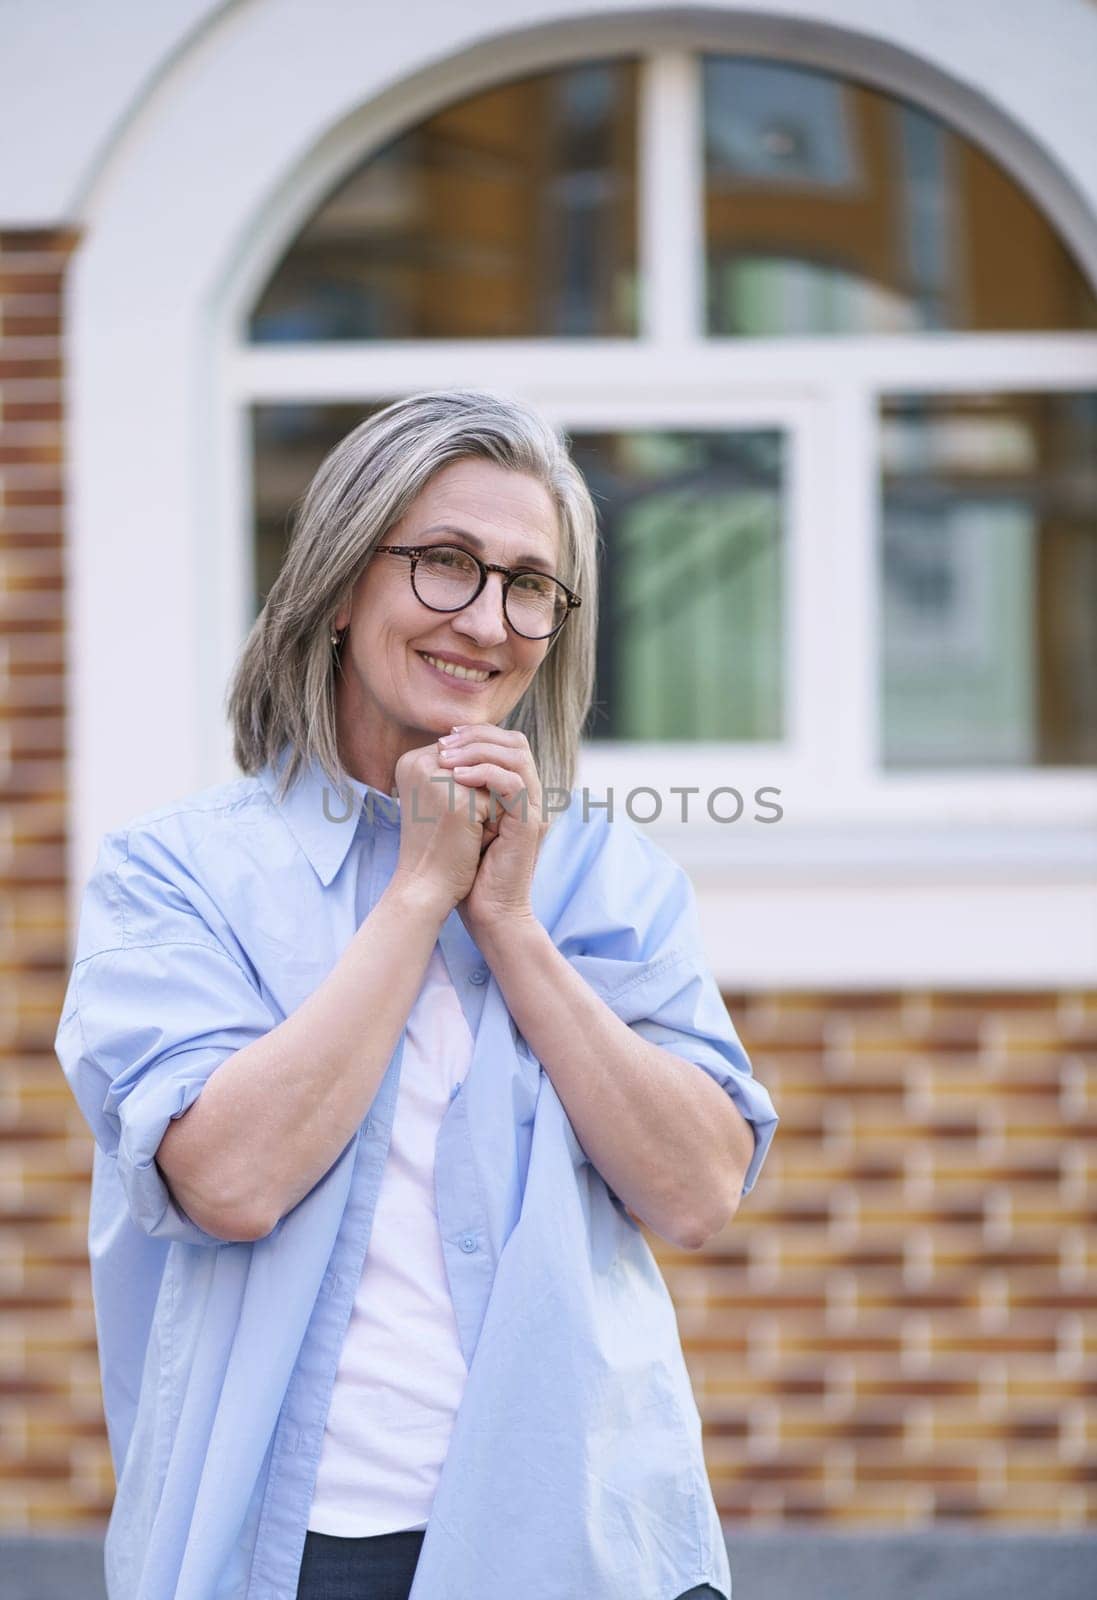 Older woman in a city setting, smiling with her hands clasped together in front of her, conveying a sense of happiness and contentment. High quality photo